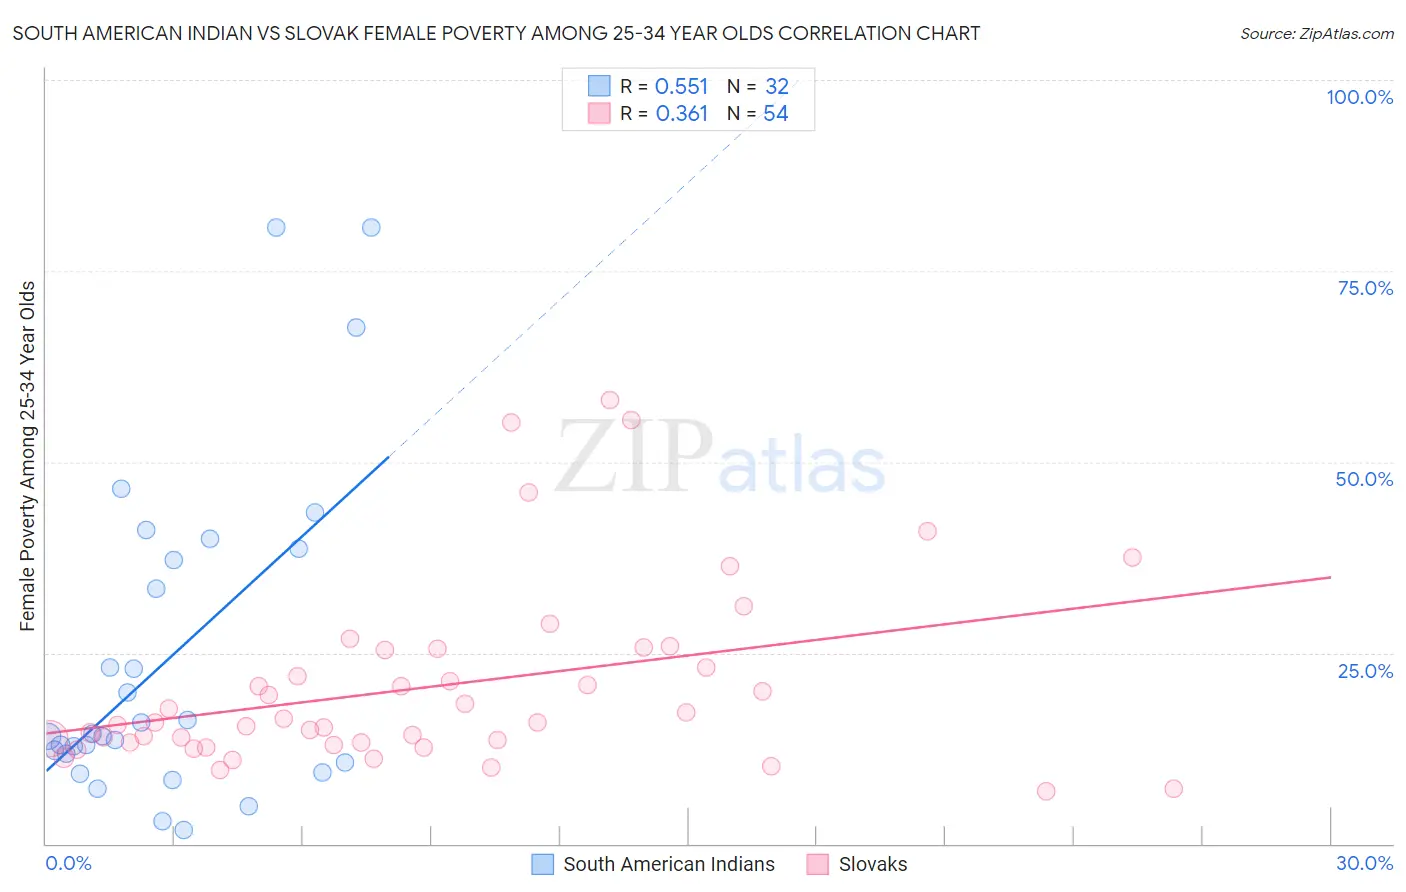 South American Indian vs Slovak Female Poverty Among 25-34 Year Olds